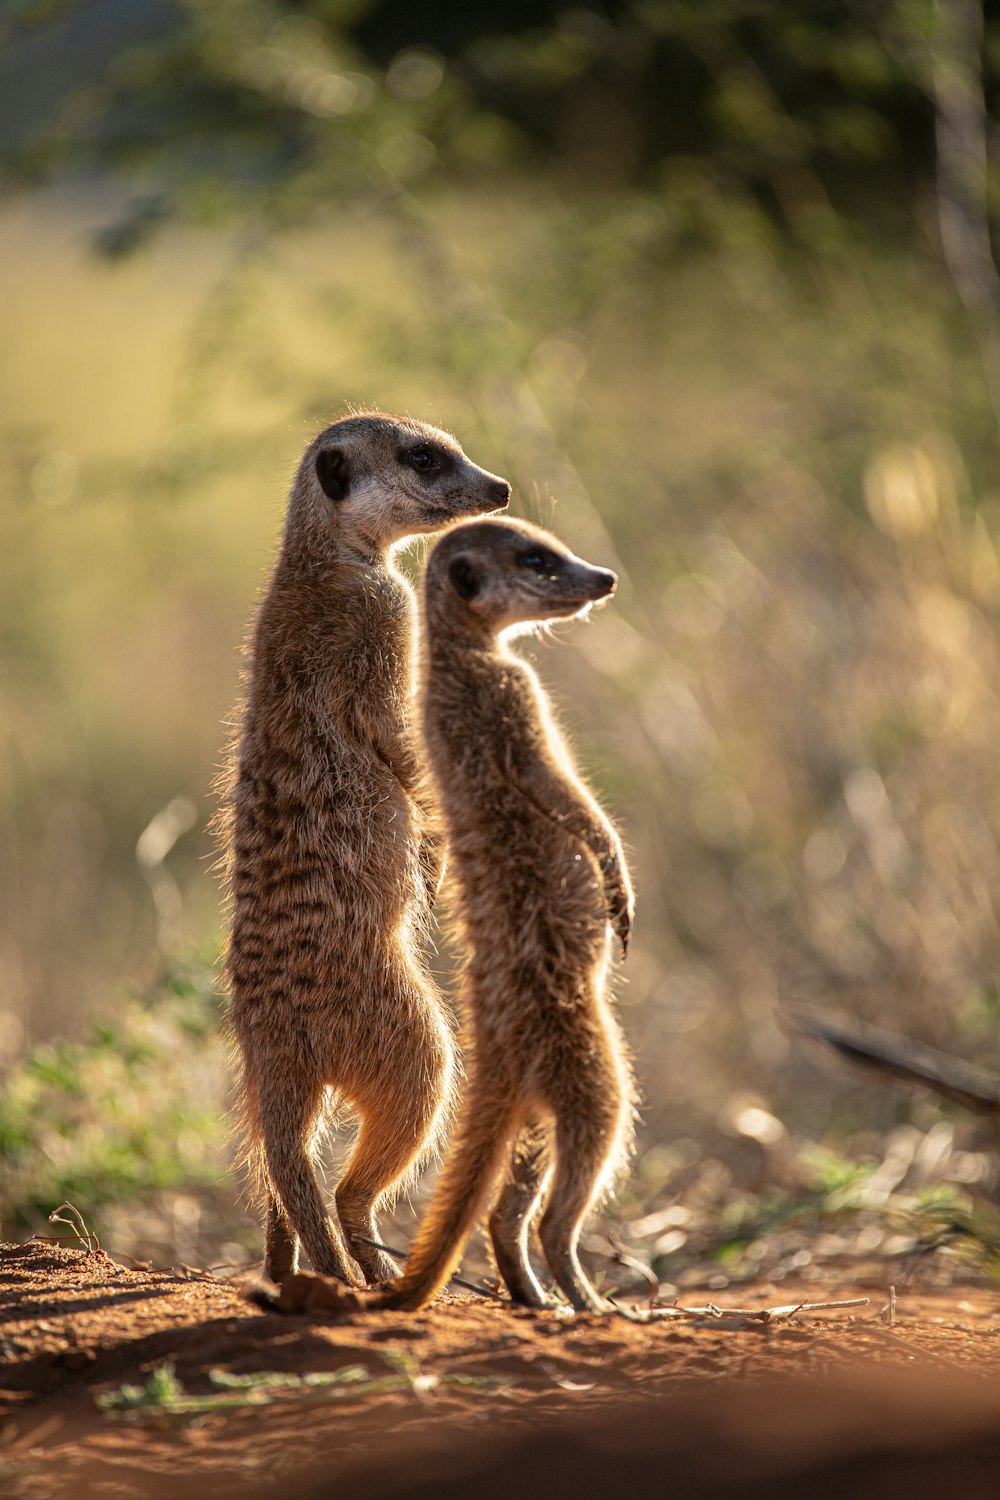 two small meerkats standing next to each other